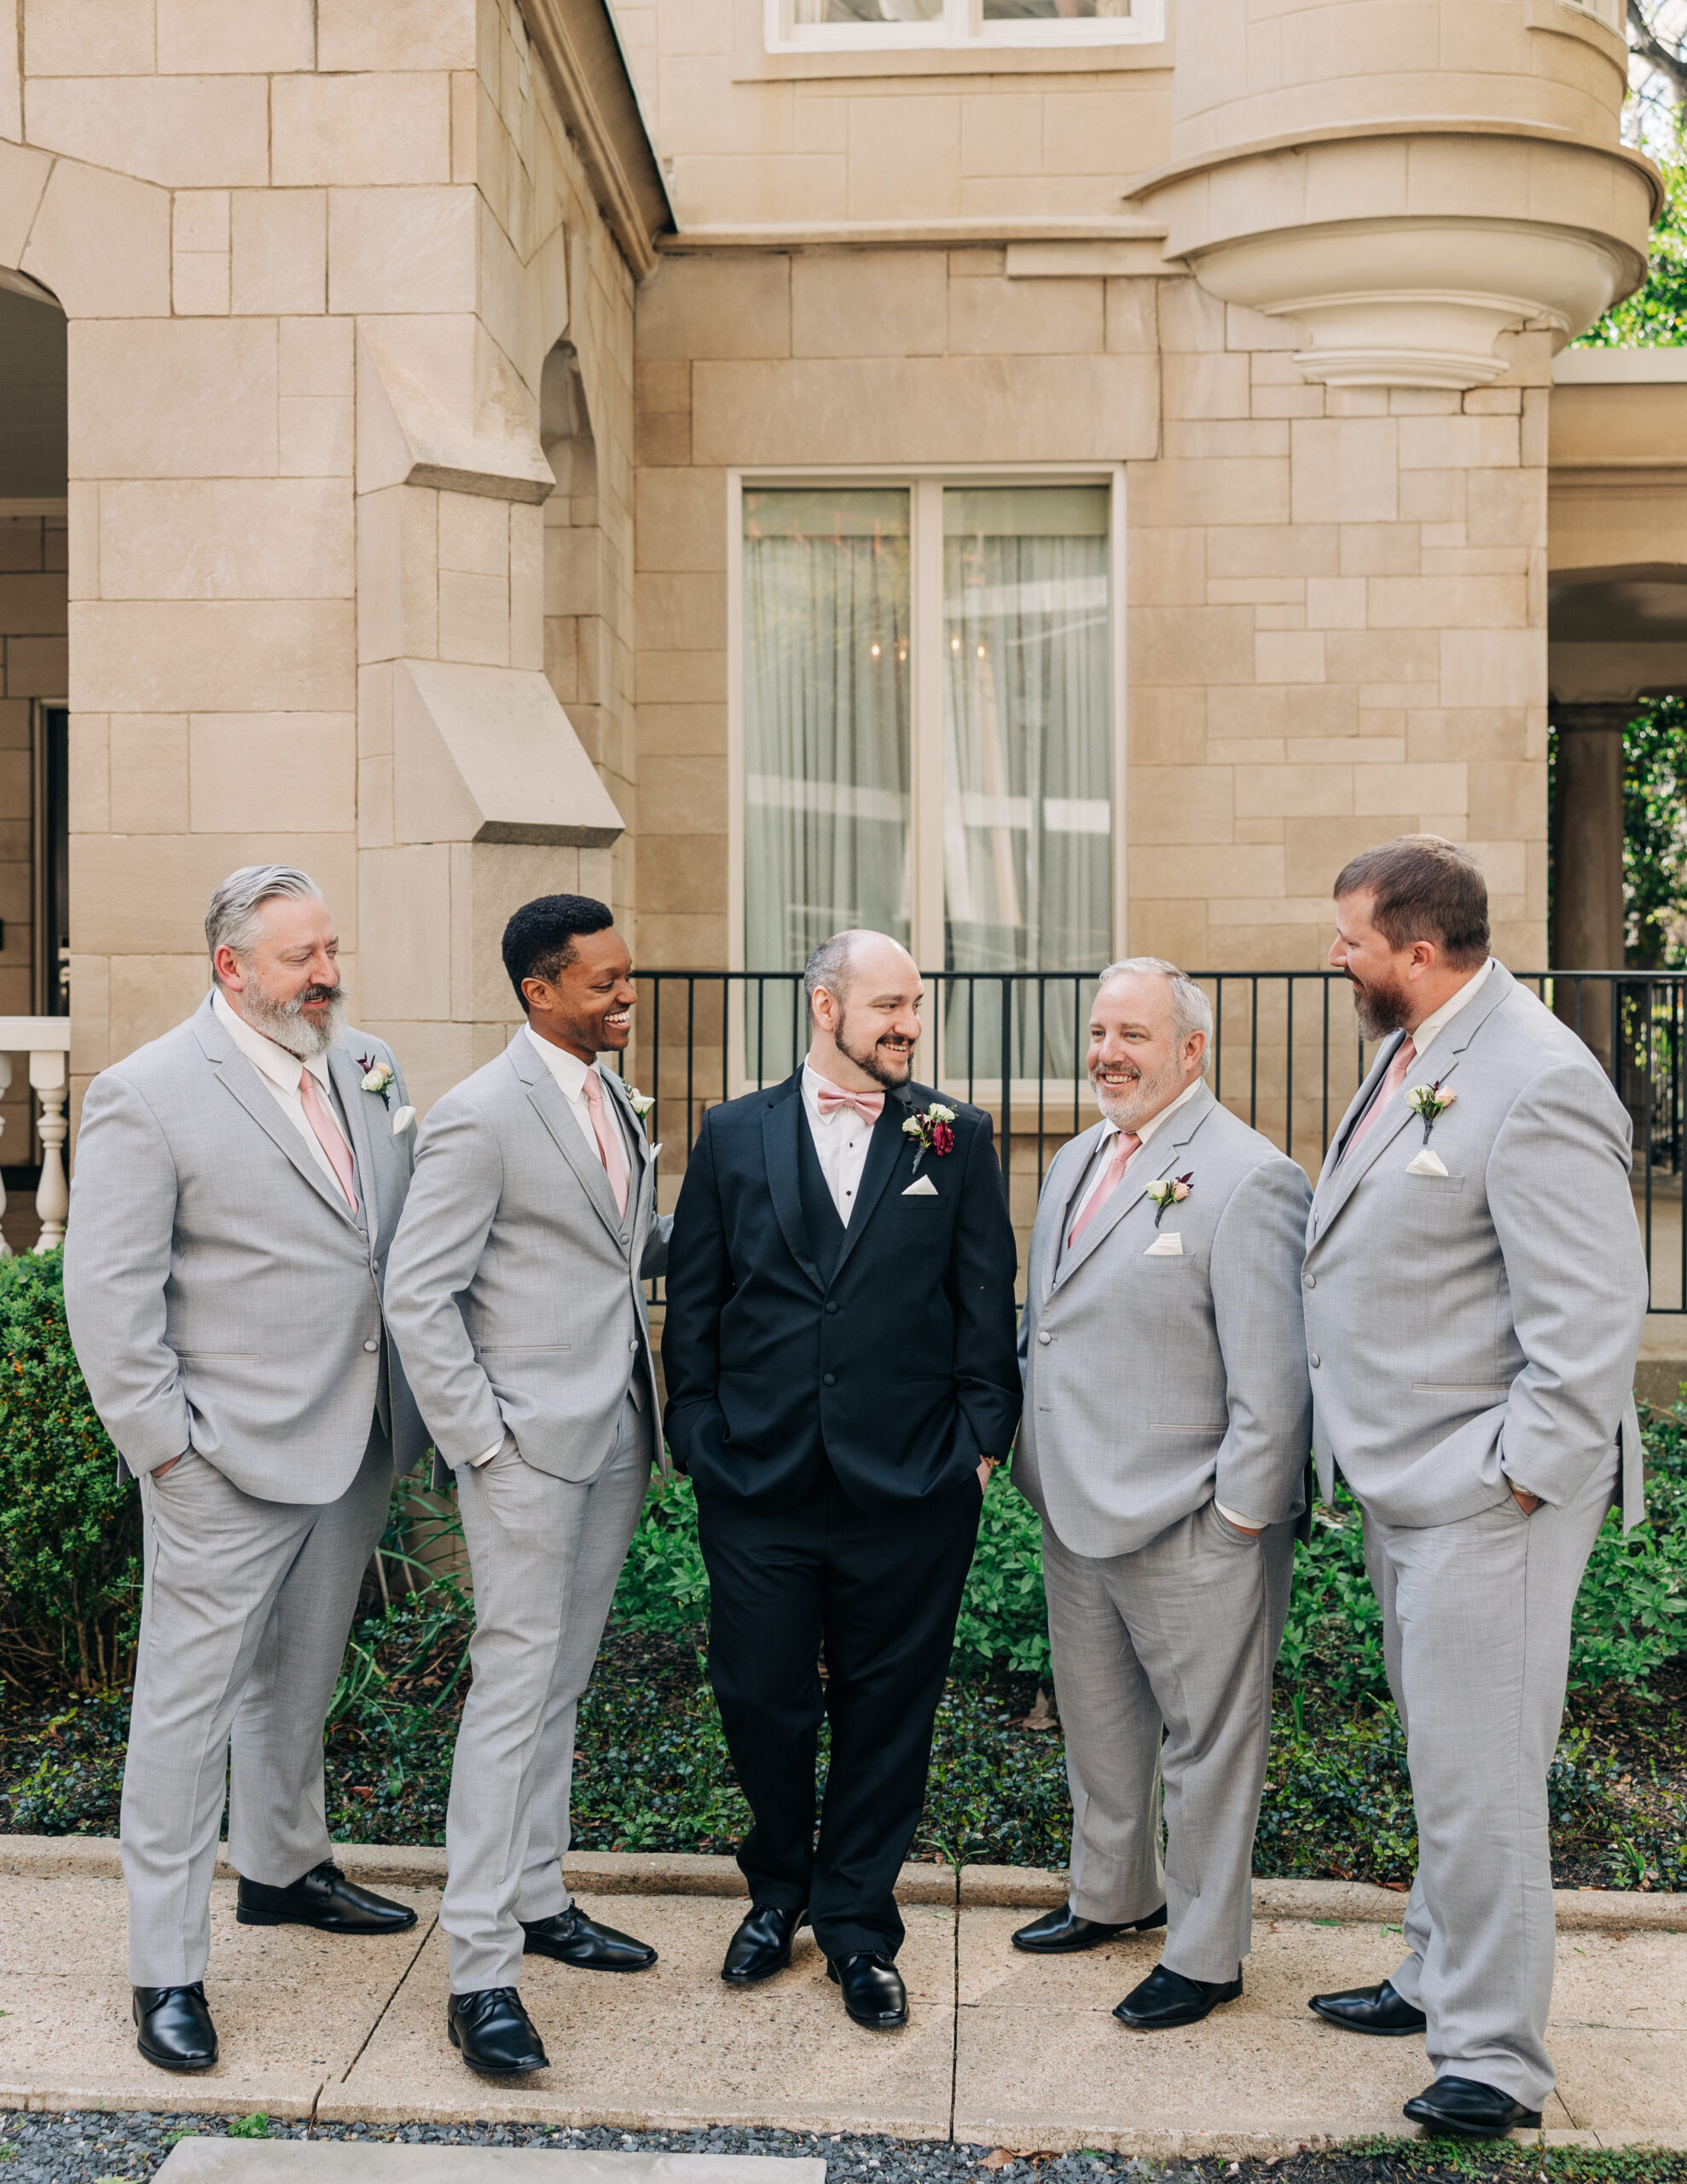 A groom stands on a sidewalk laughing with his groomsmen in grey suits